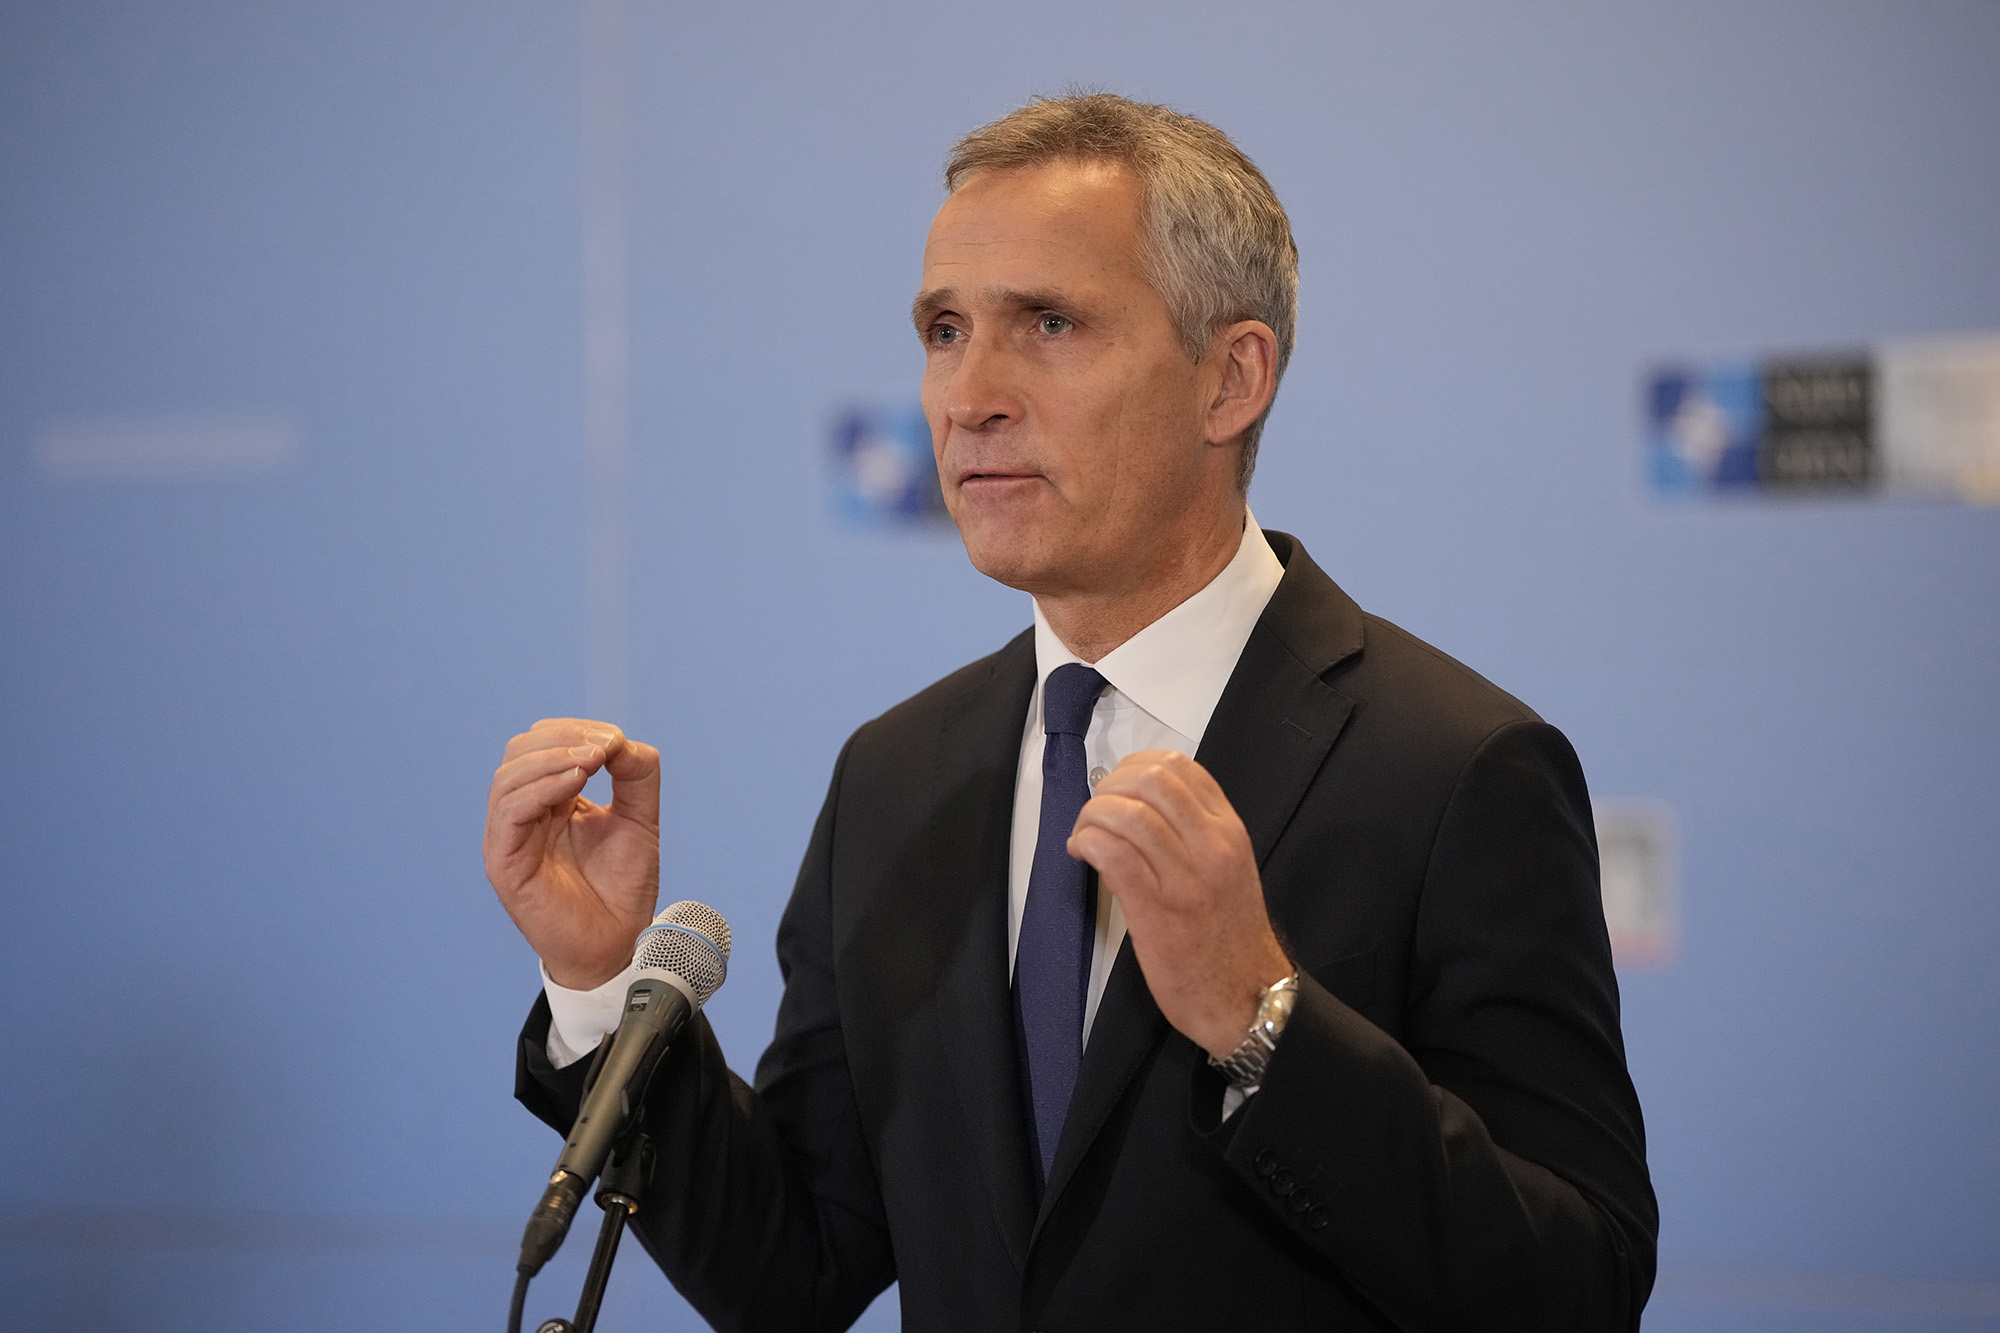 NATO Secretary-General Jens Stoltenberg delivers his speech as he arrives for the first day of the meeting of NATO Ministers of Foreign Affairs in Bucharest, Romania, on November 29.